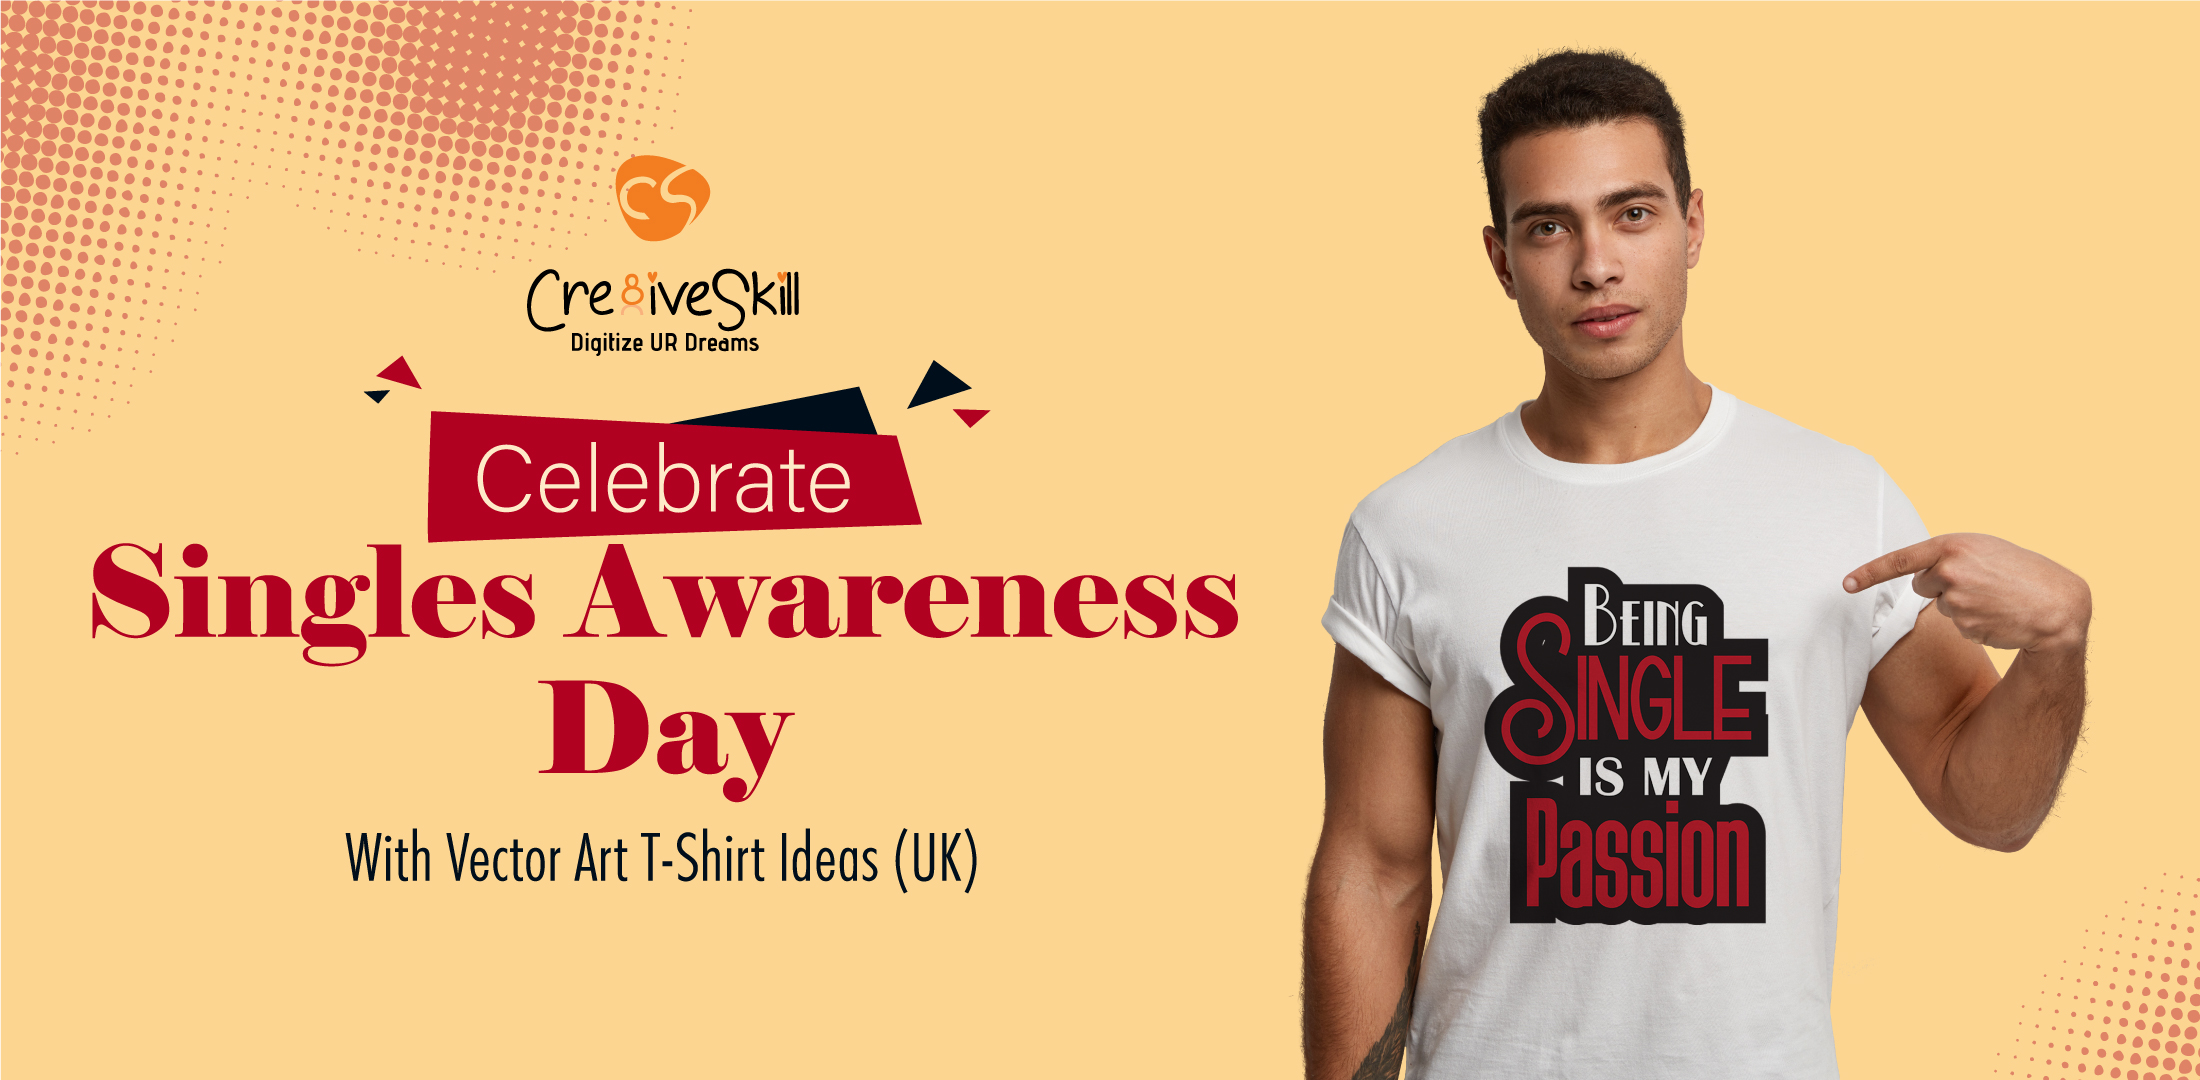 How To Celebrate Singles Awareness Day With Vector Art T-Shirt Ideas (UK) - Cre8iveSkill